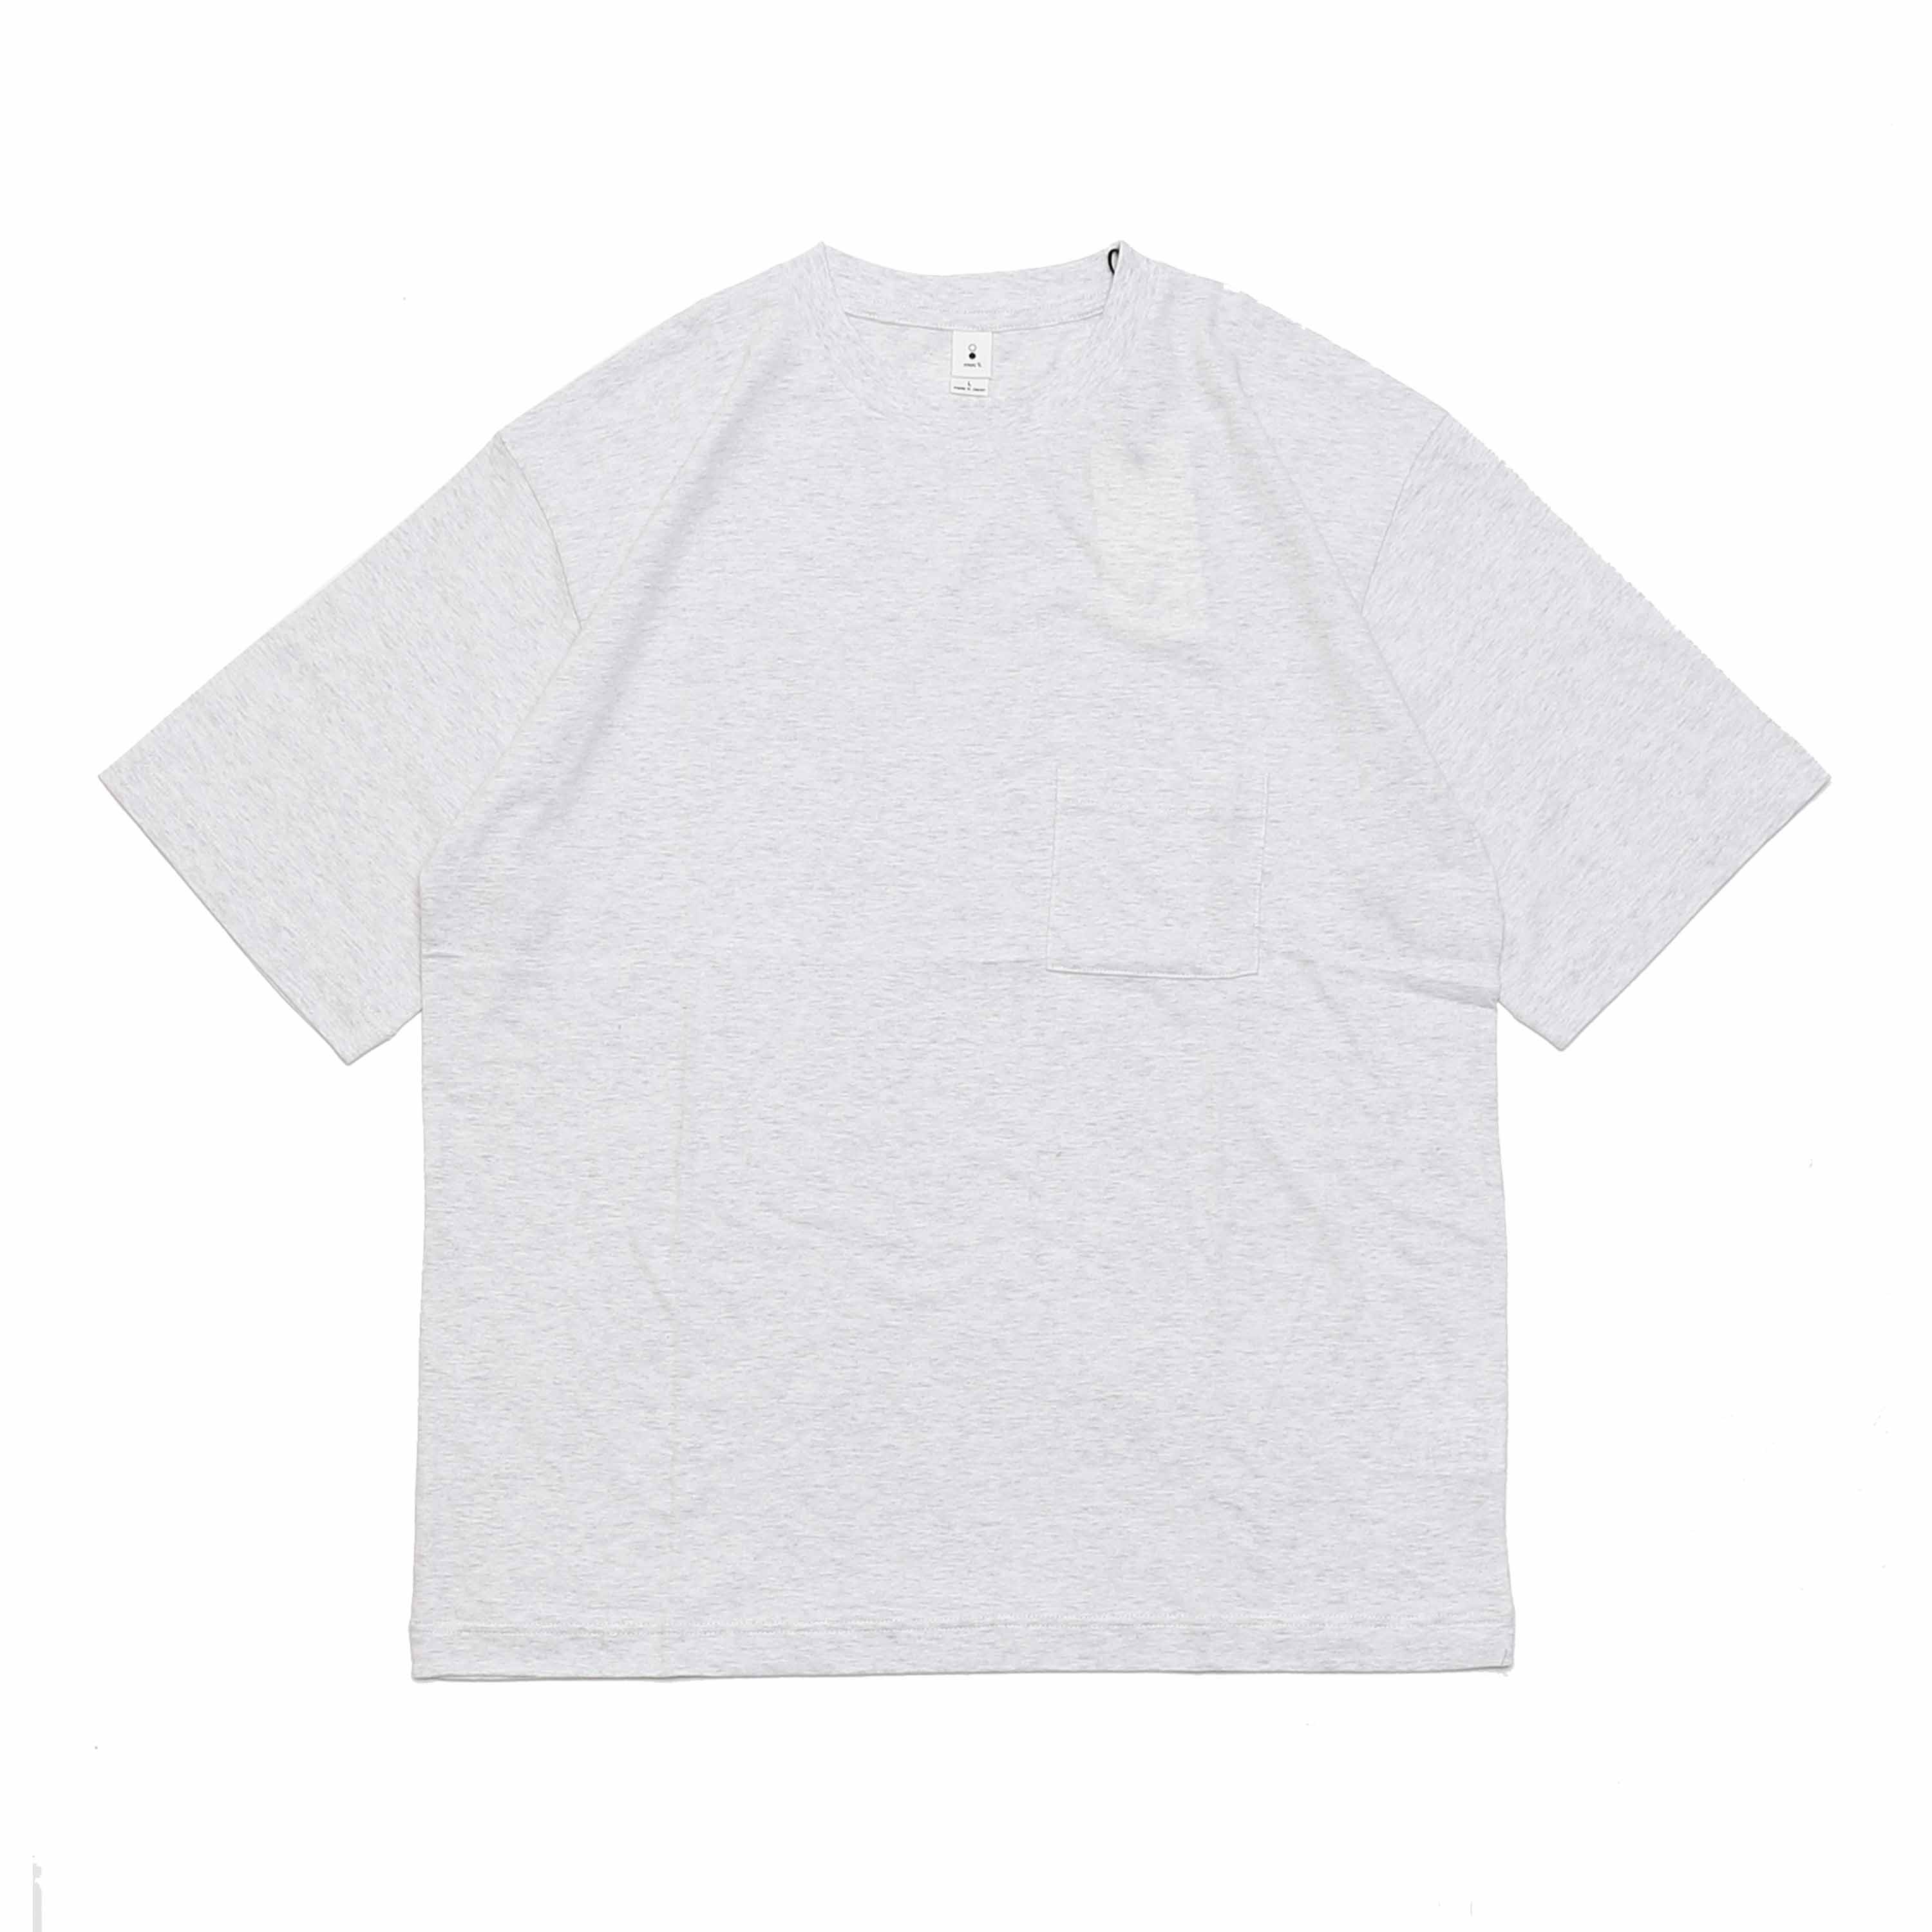 LOOSE FIT S/S TEE - WHITE